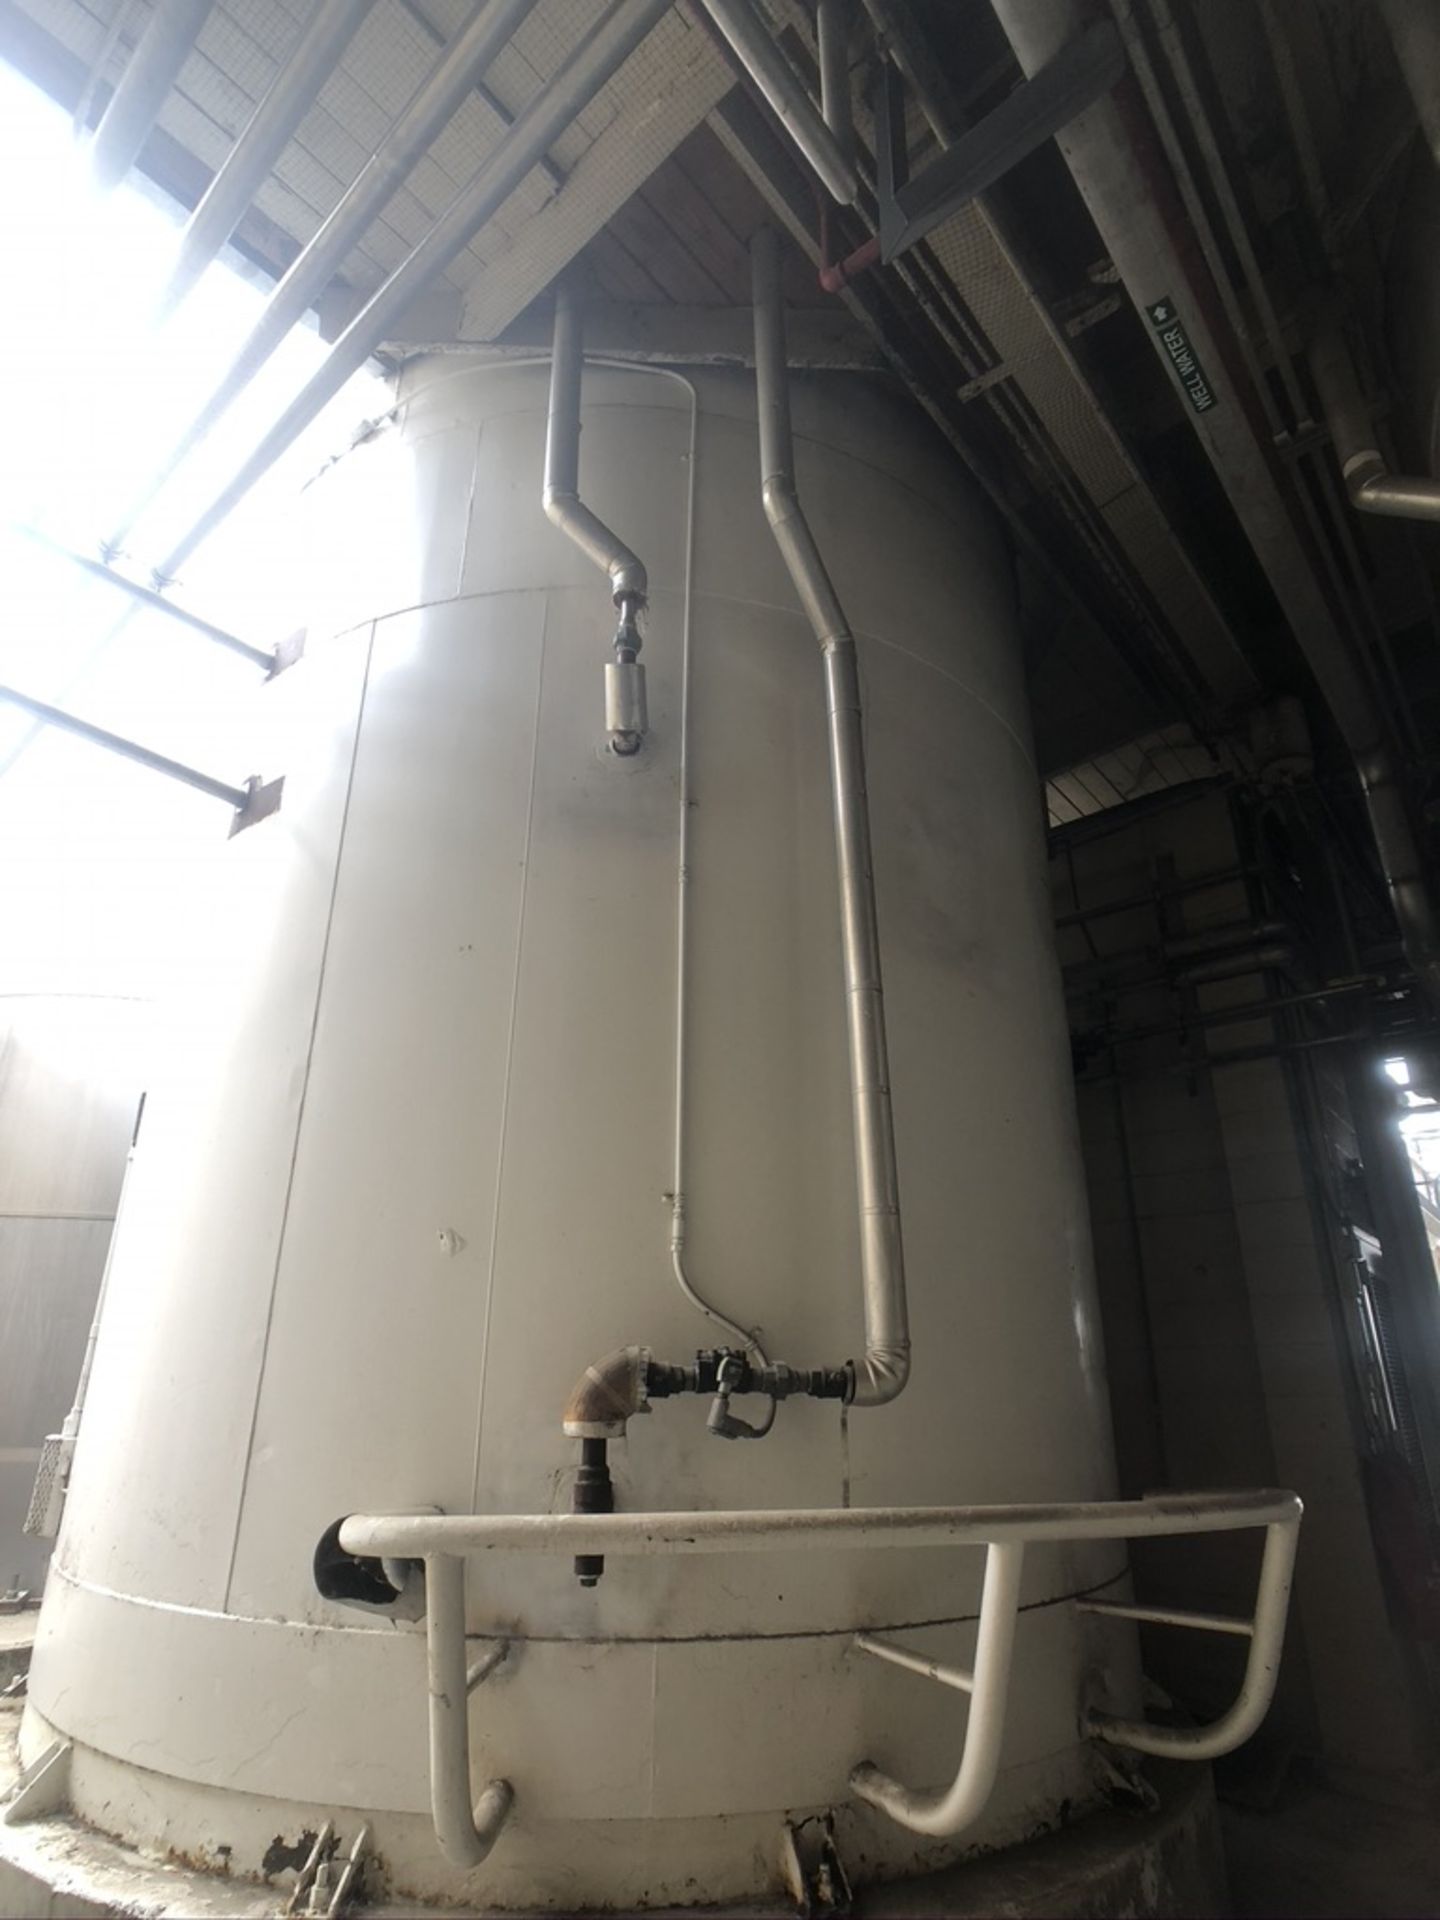 CREAMERY PACKAGE 30,000 GALLON JACKETED SILO, S/N 2961 - Image 8 of 26